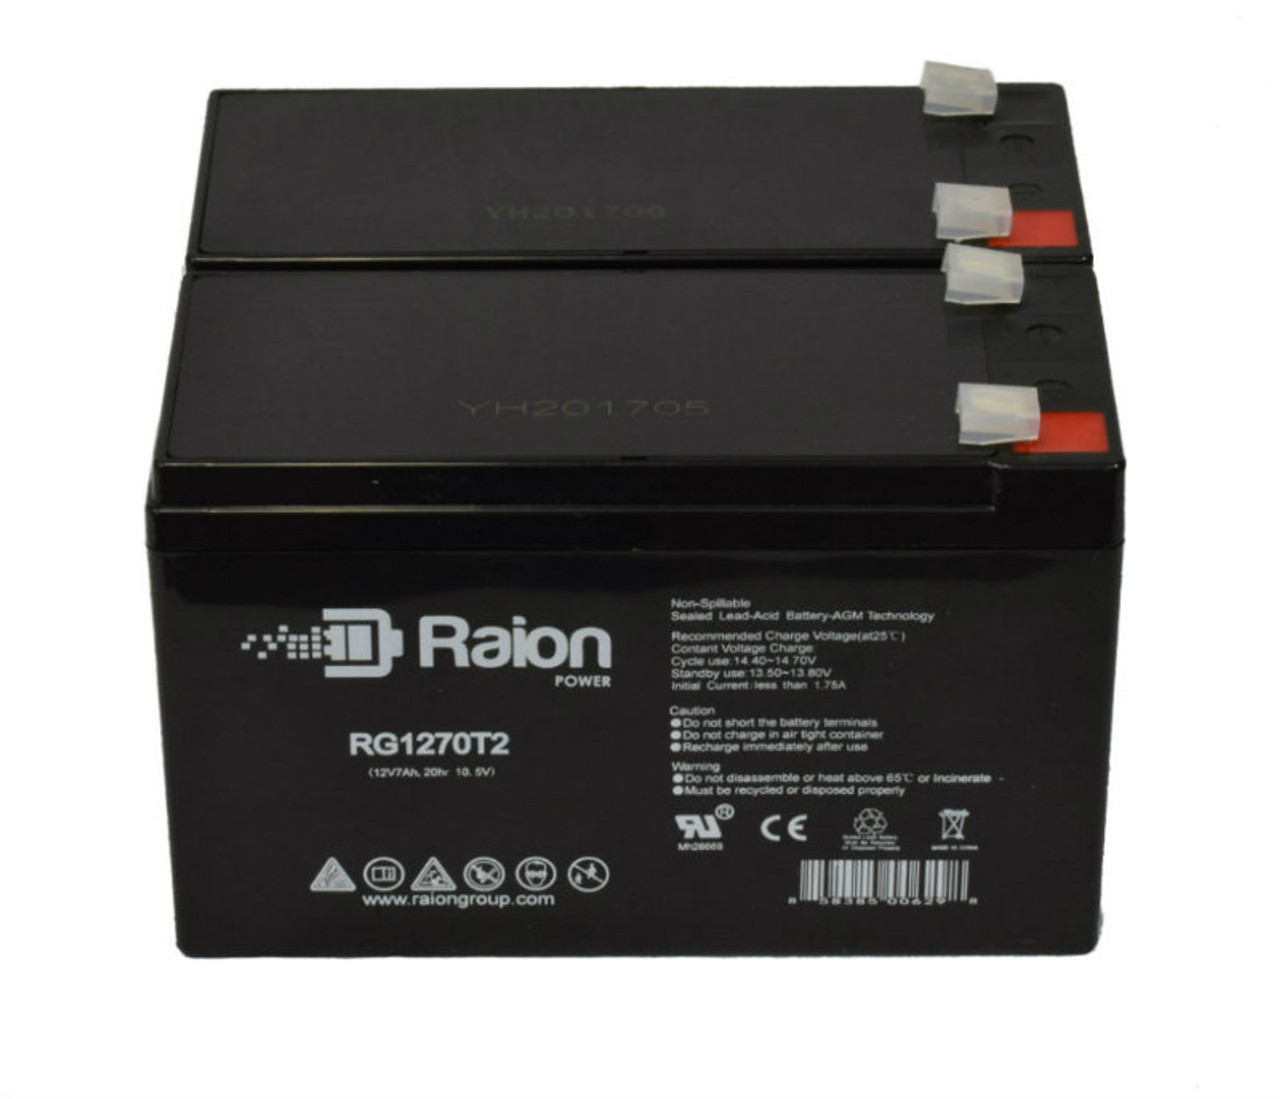 Raion Power Replacement 12V 7Ah Battery for Gruber Power 58AGPS-12-7-F2 - 2 Pack